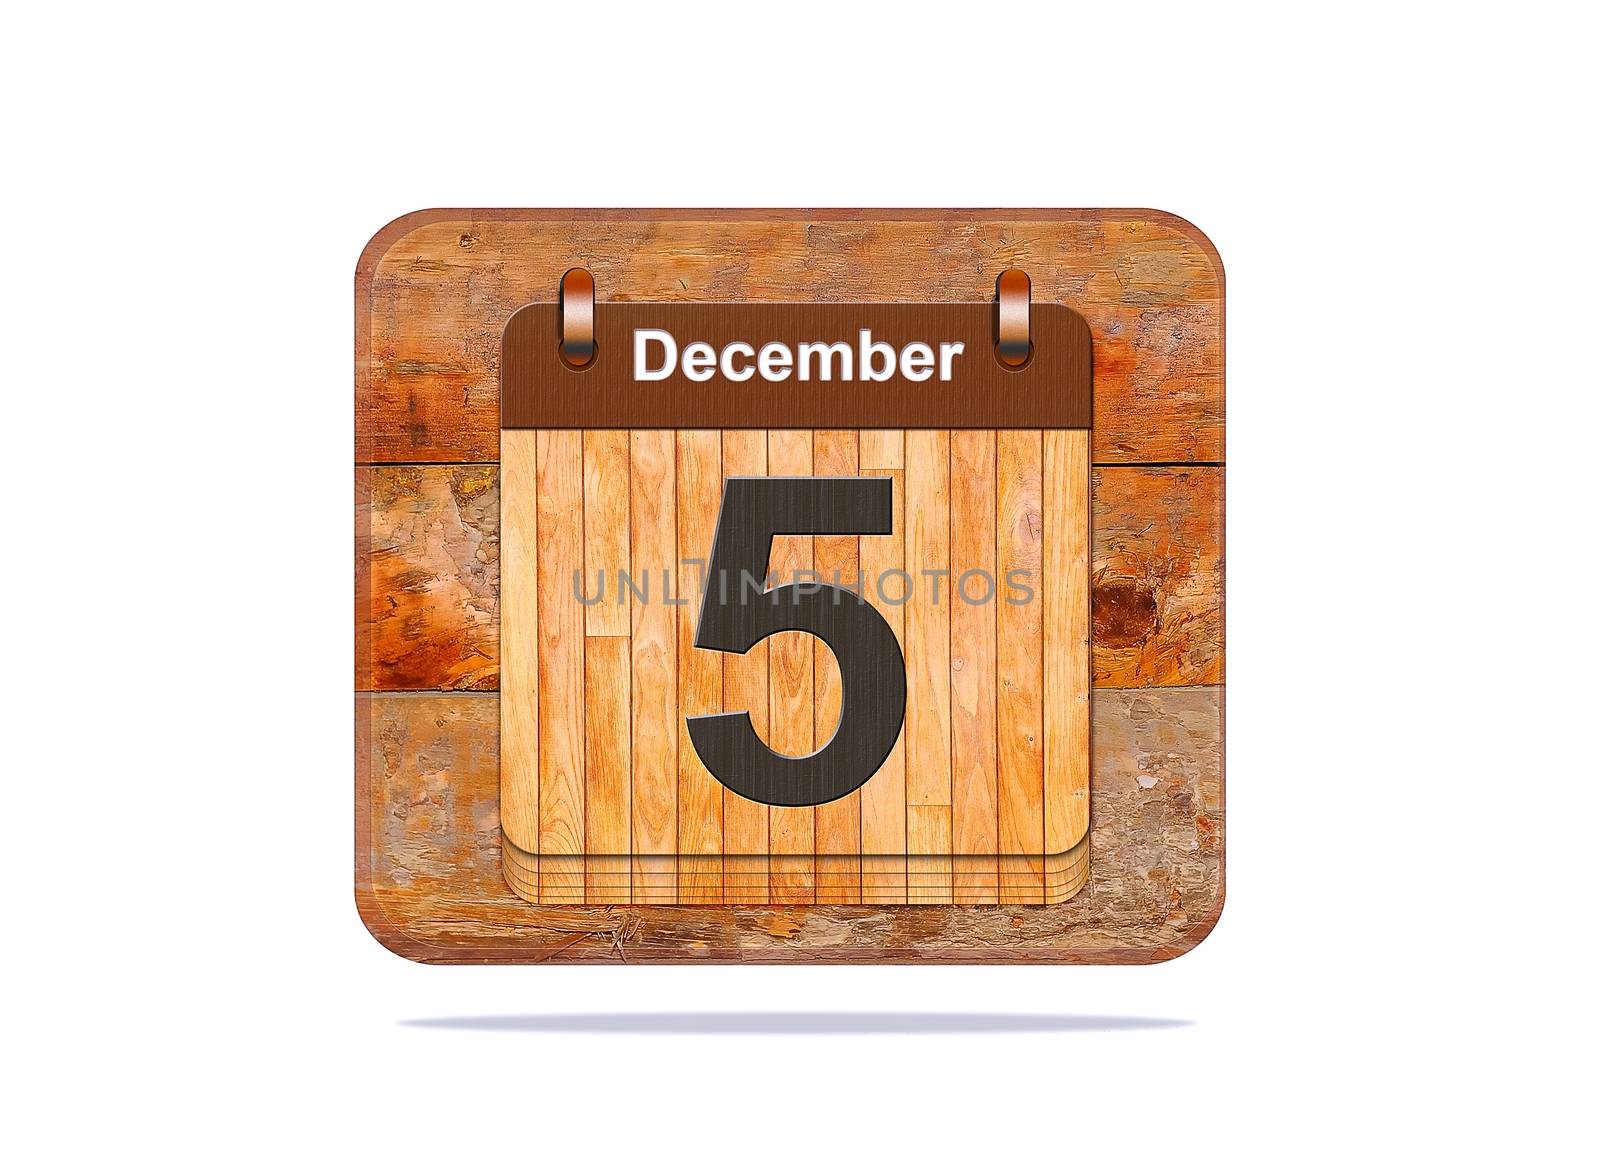 Calendar with the date of December 5.